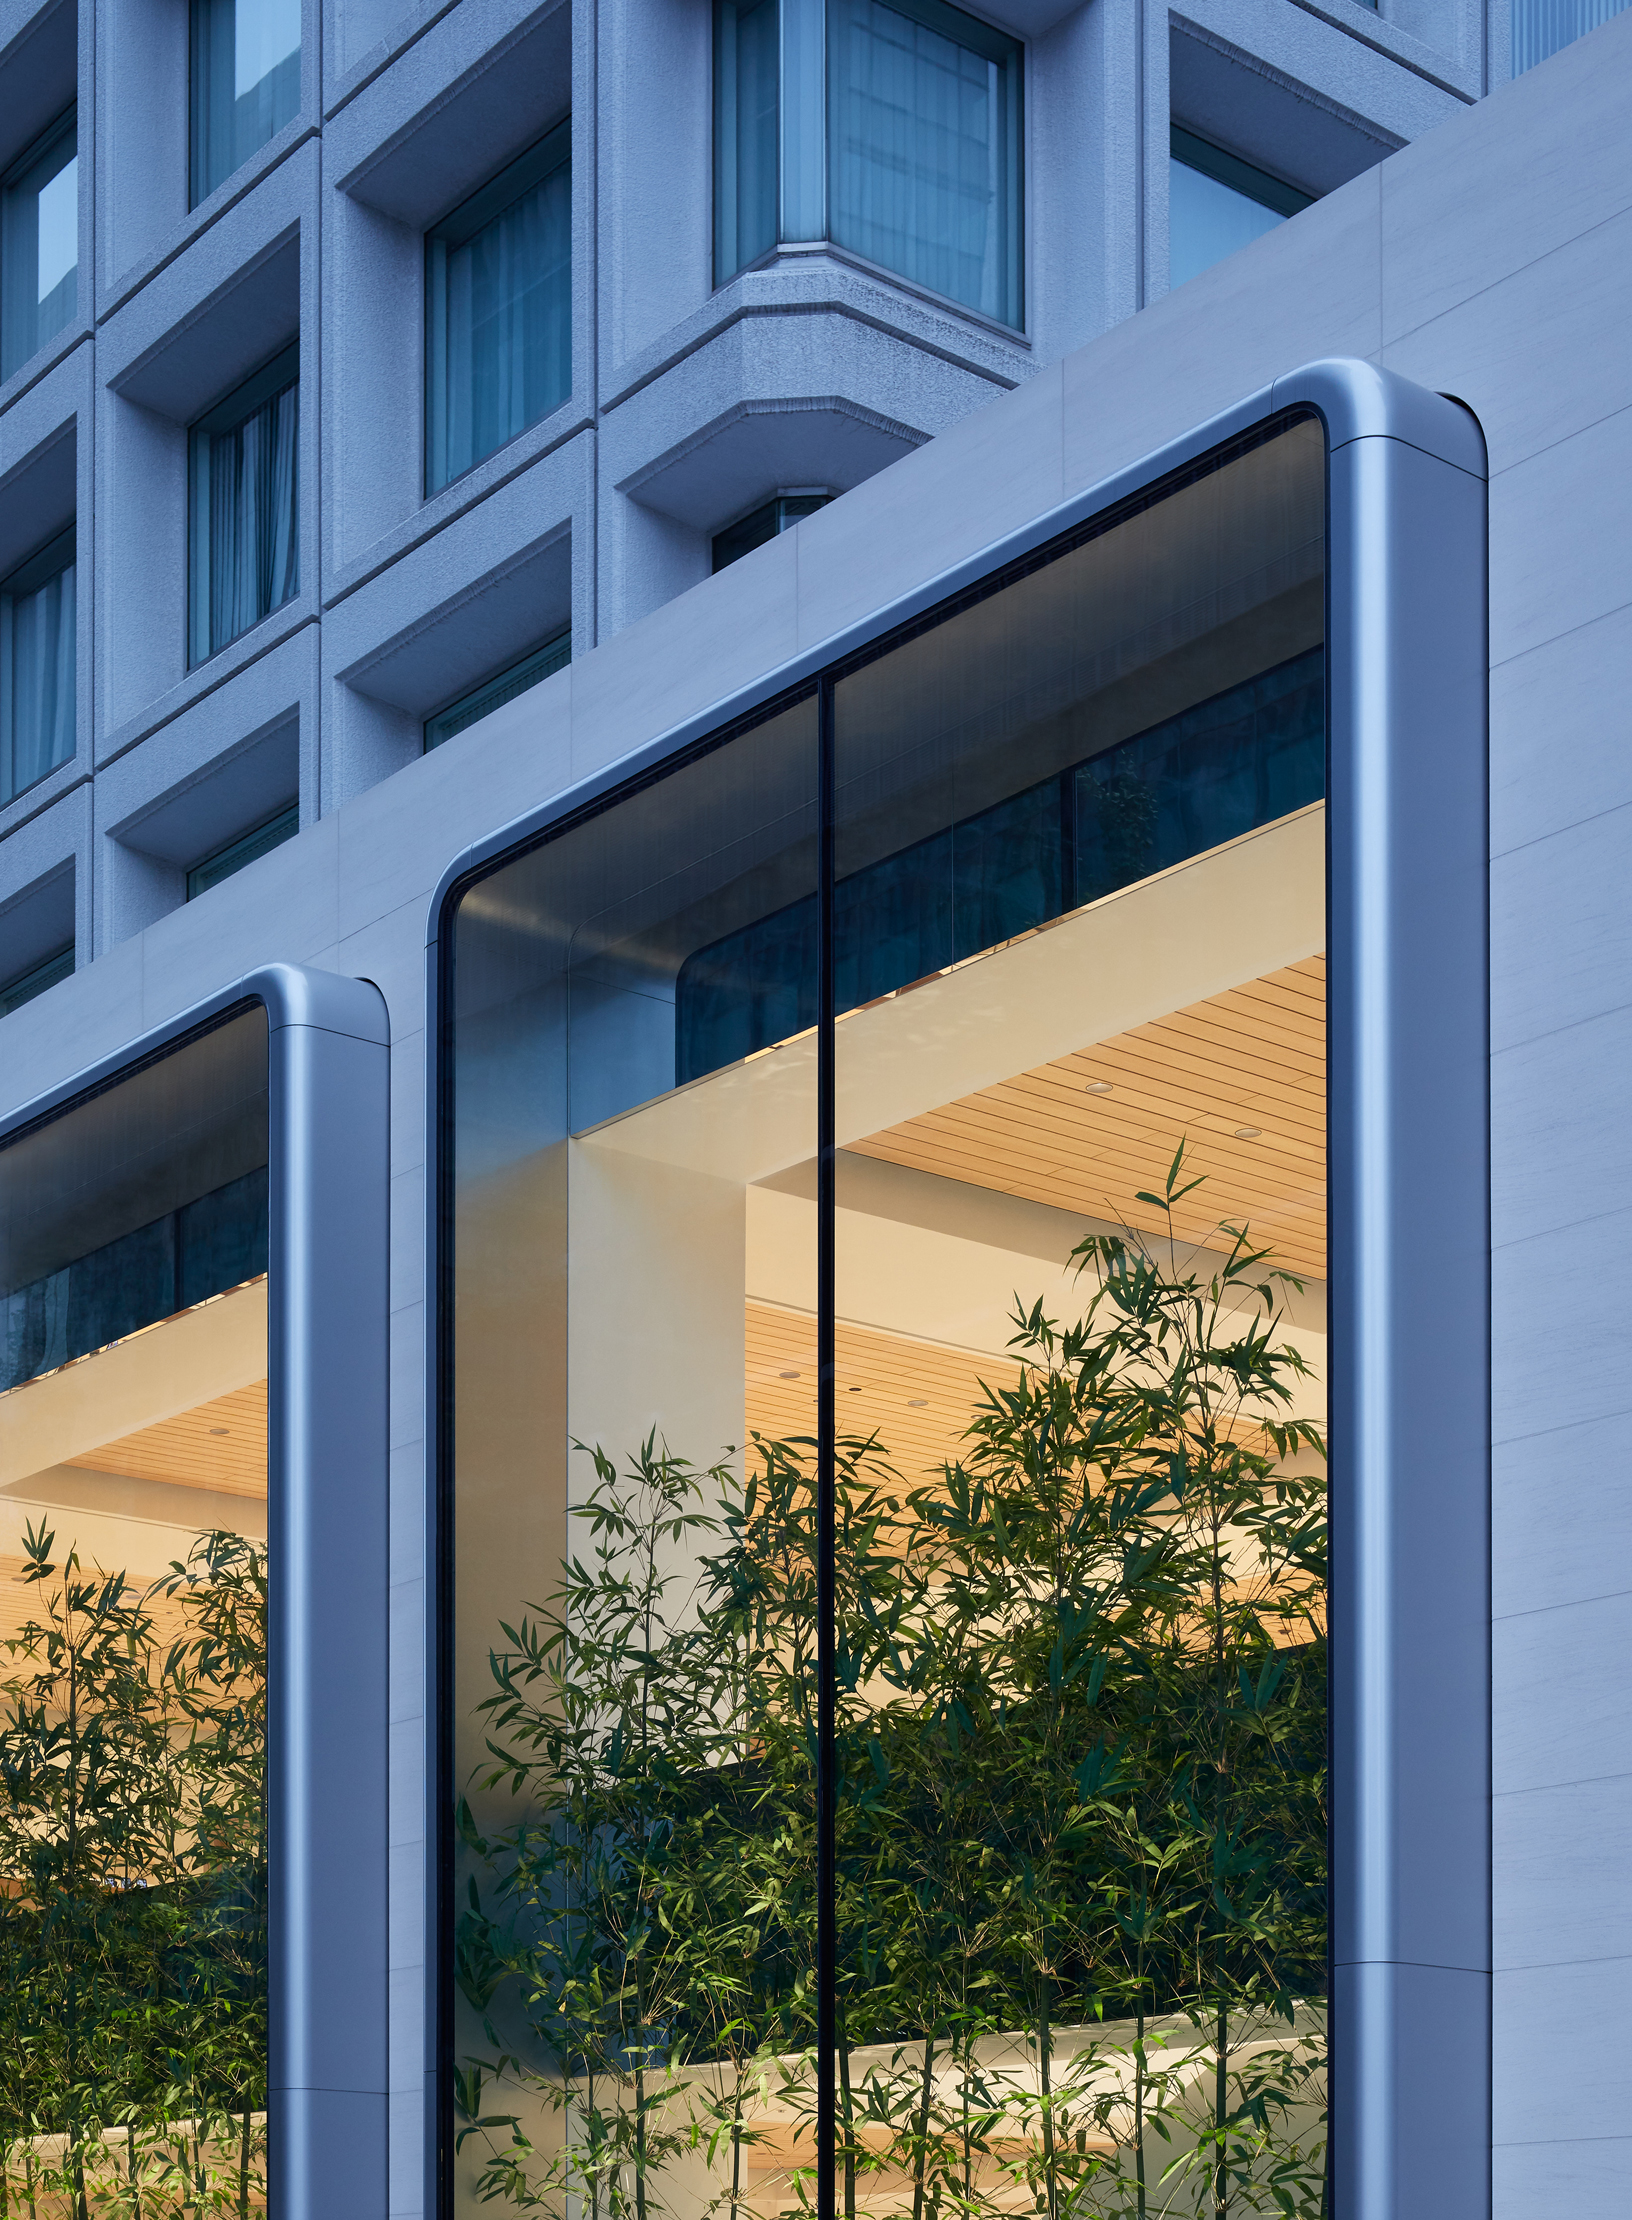 Apple's New Marunouchi Store Opening Saturday, September 7 in Tokyo - Largest Store in Japan